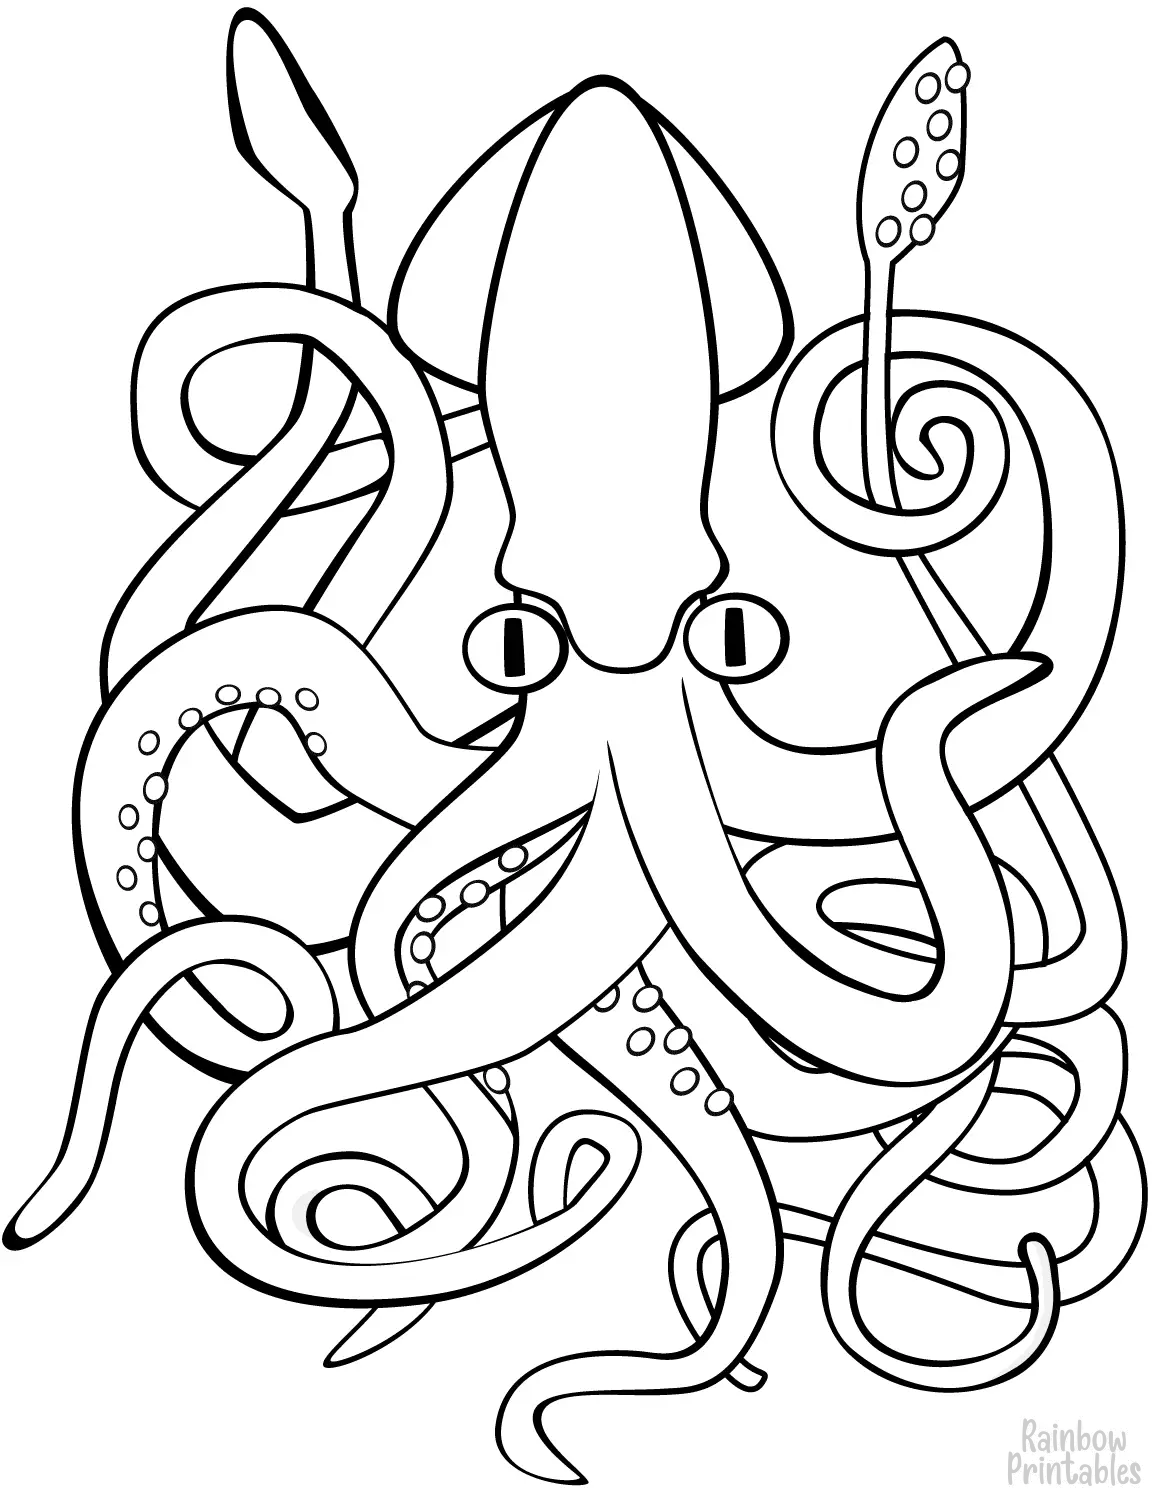 SIMPLE-EASY-line-drawings-SQUID-coloring-page-for-kids